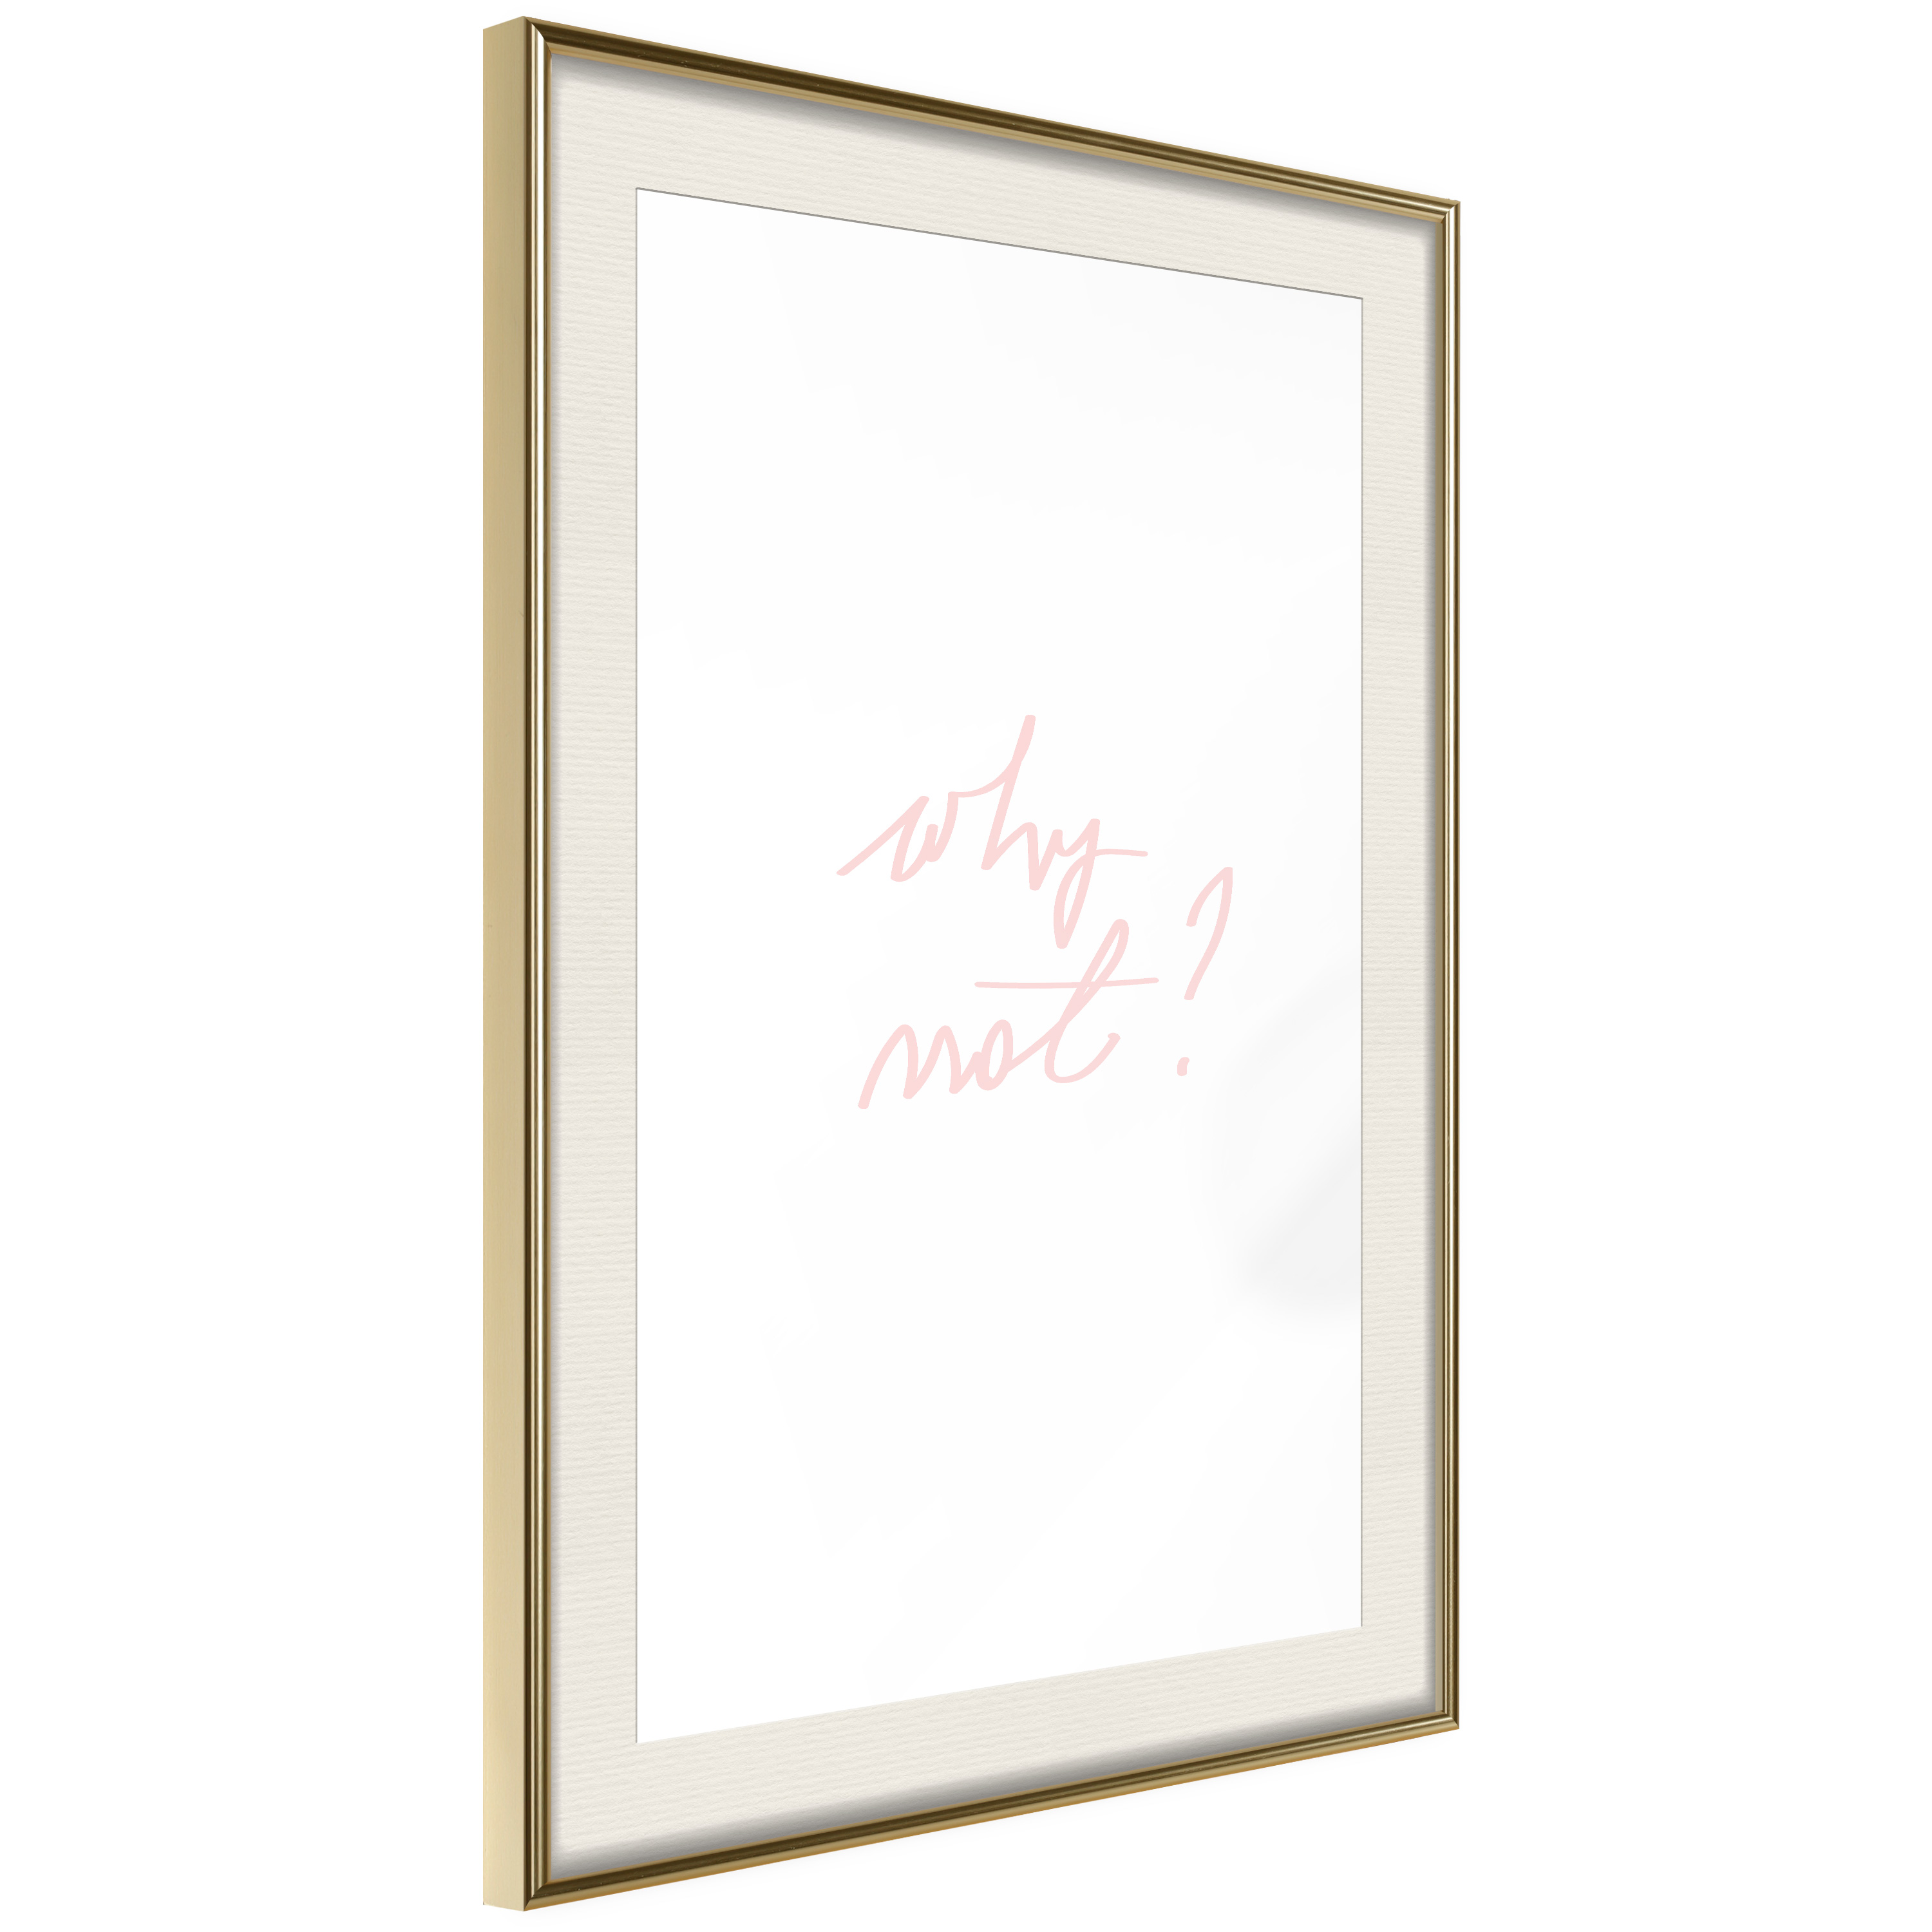 Poster - Why Not? - 20x30